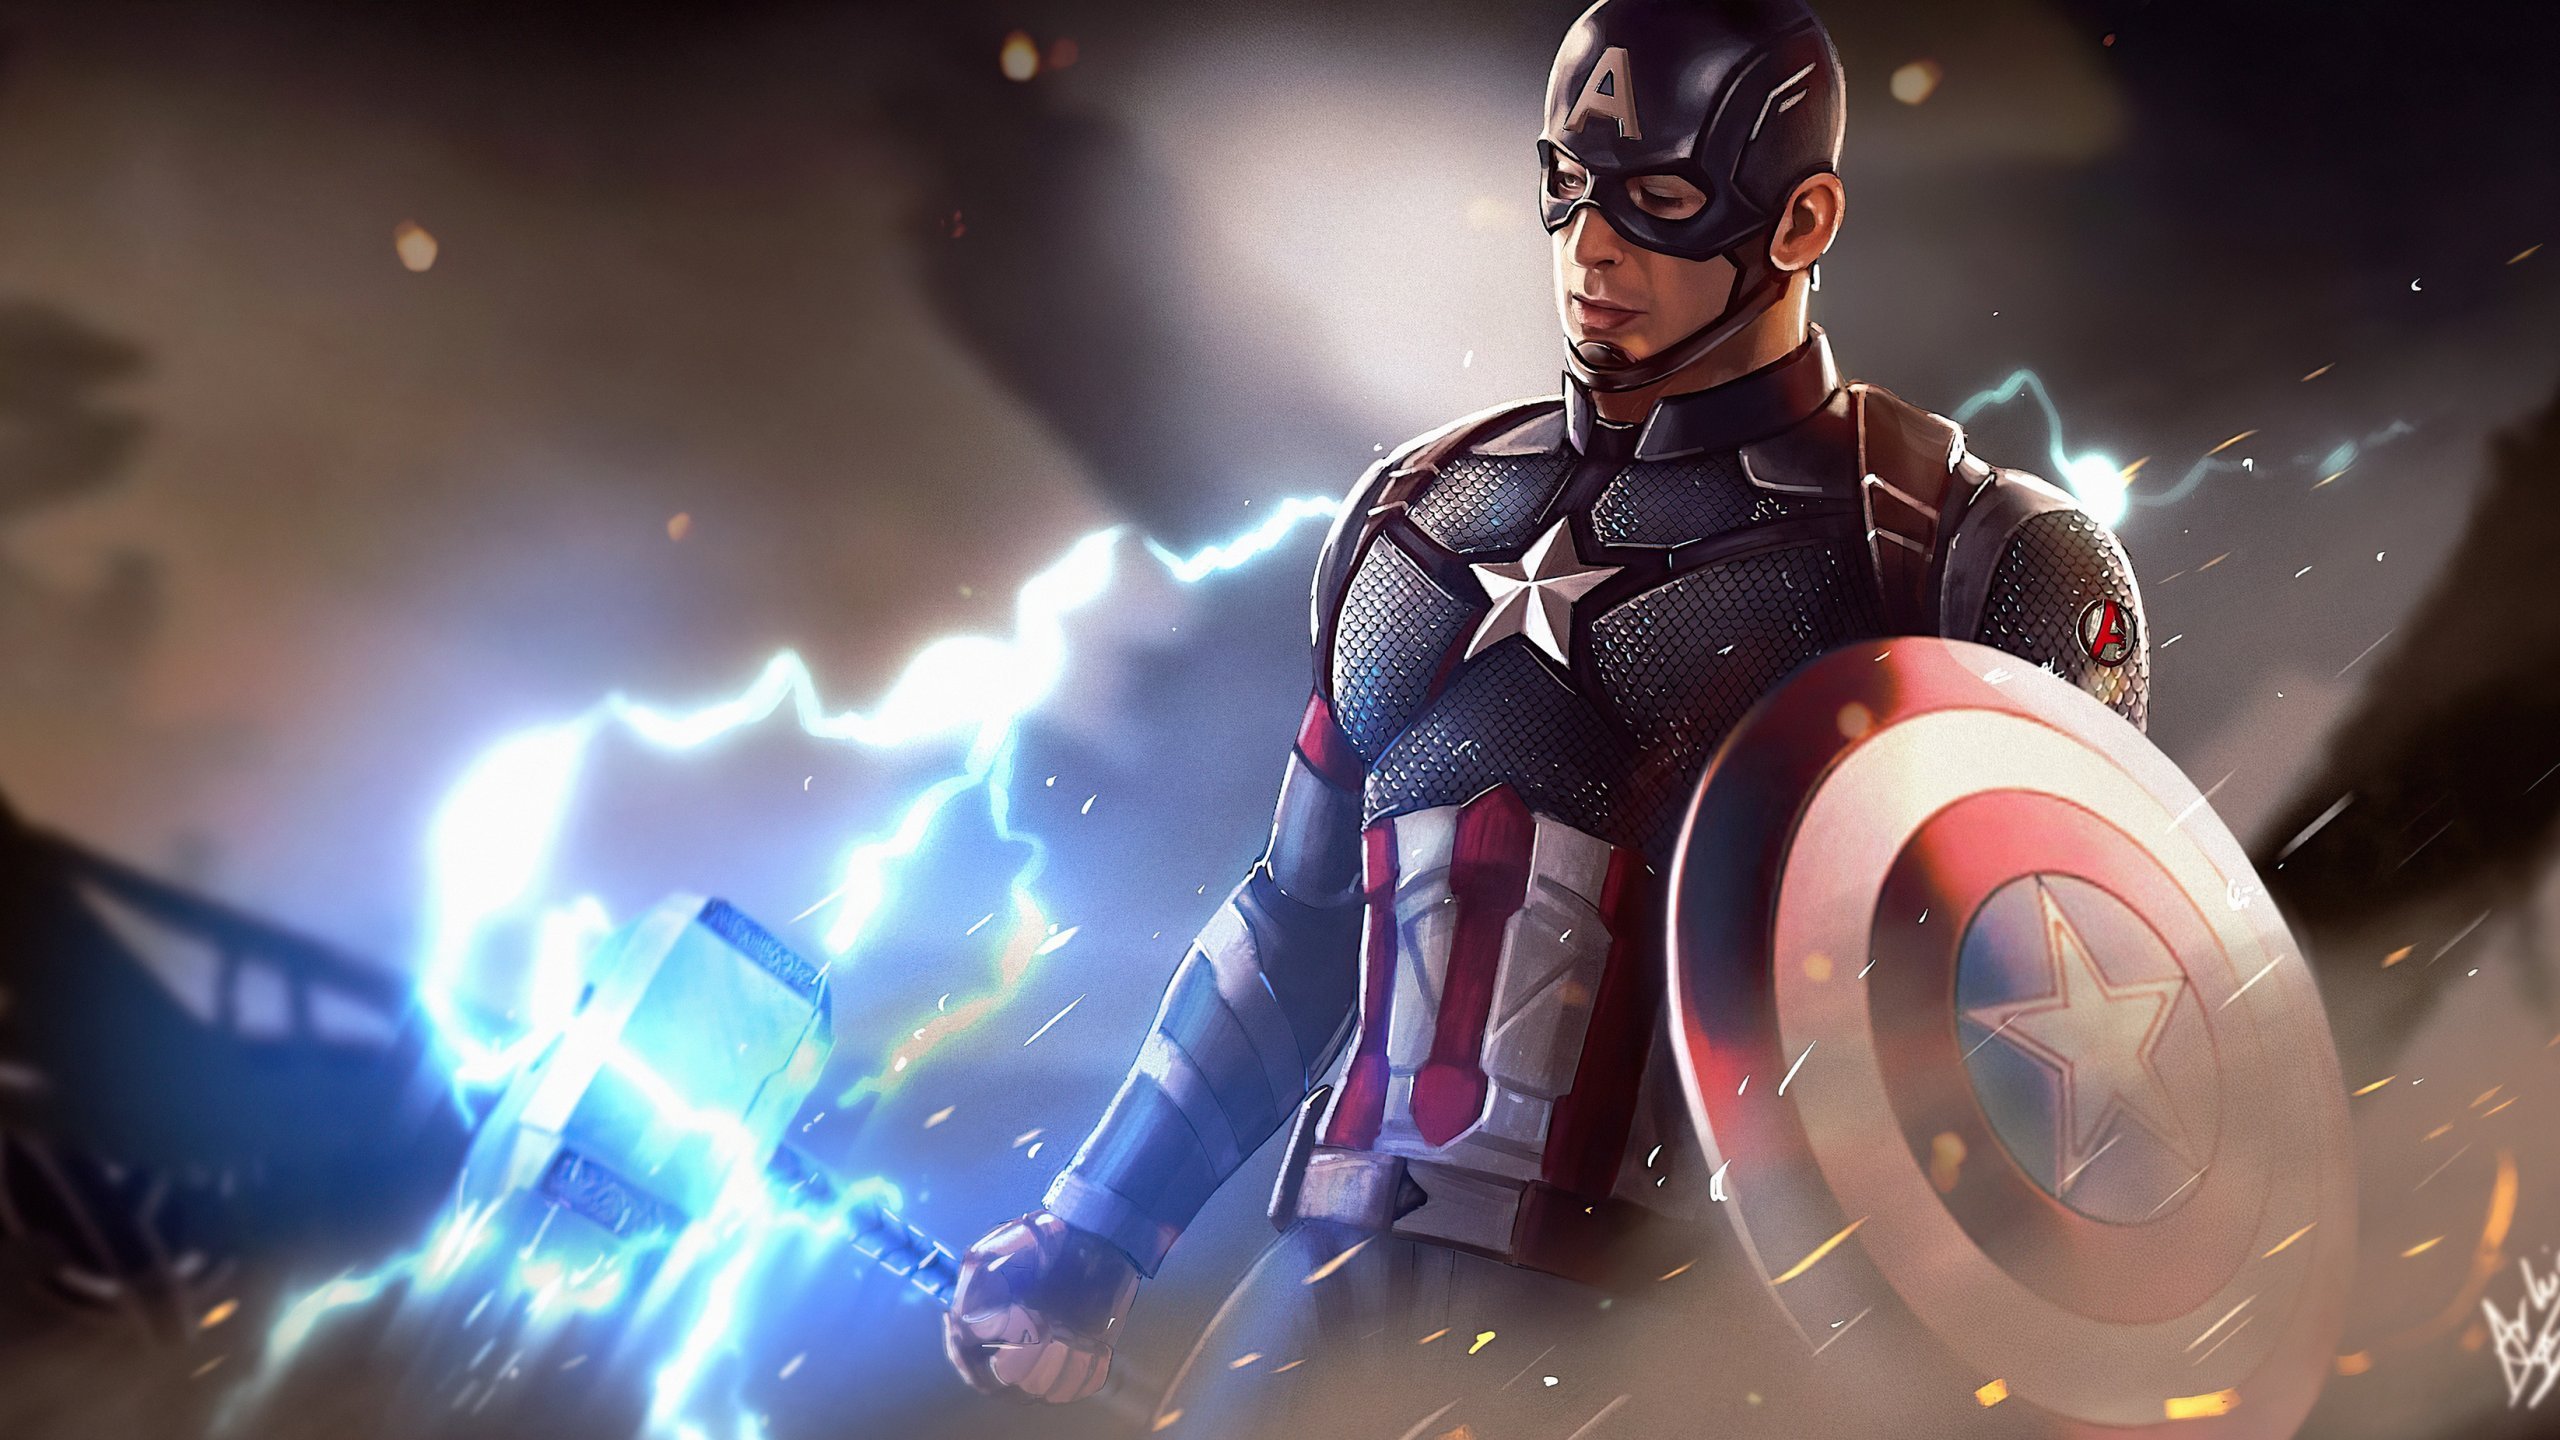 Captain America with Thors hammer Wallpaper 4k Ultra HD ID:7197